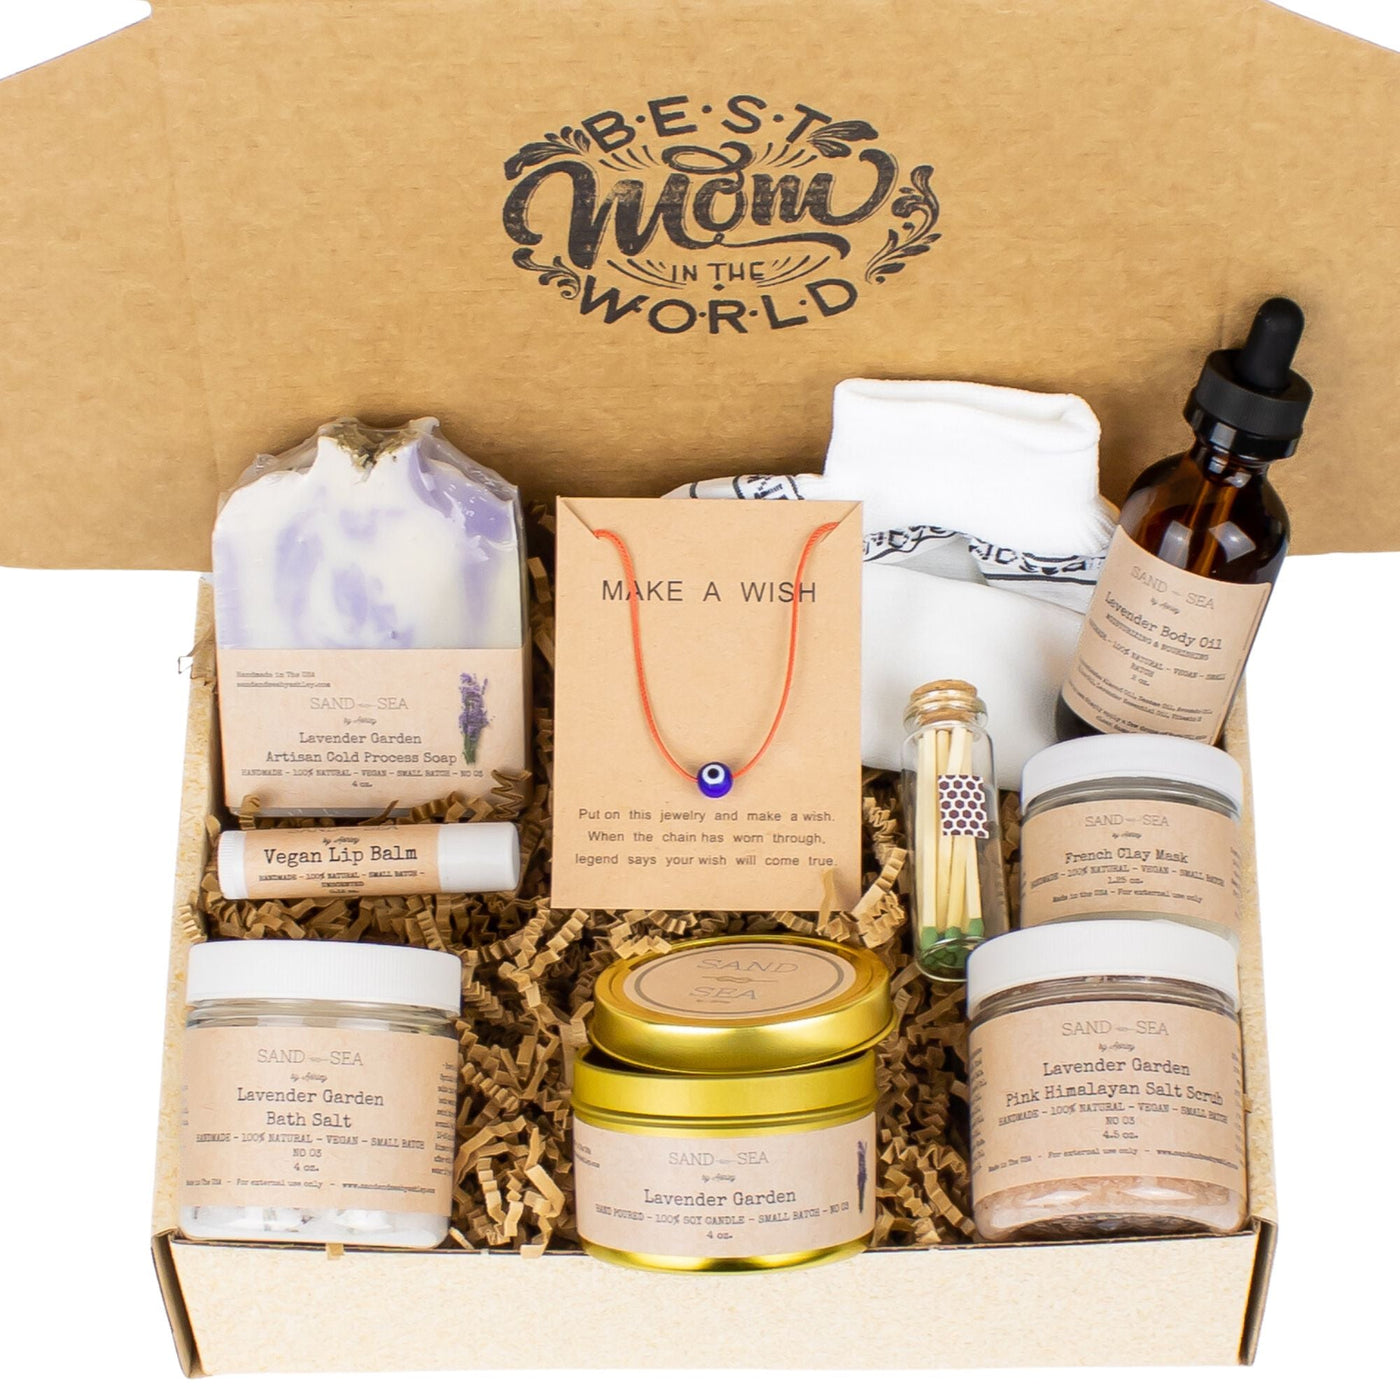 Mothers Day Gift Baskets: Gardening Gift for Mothers Day